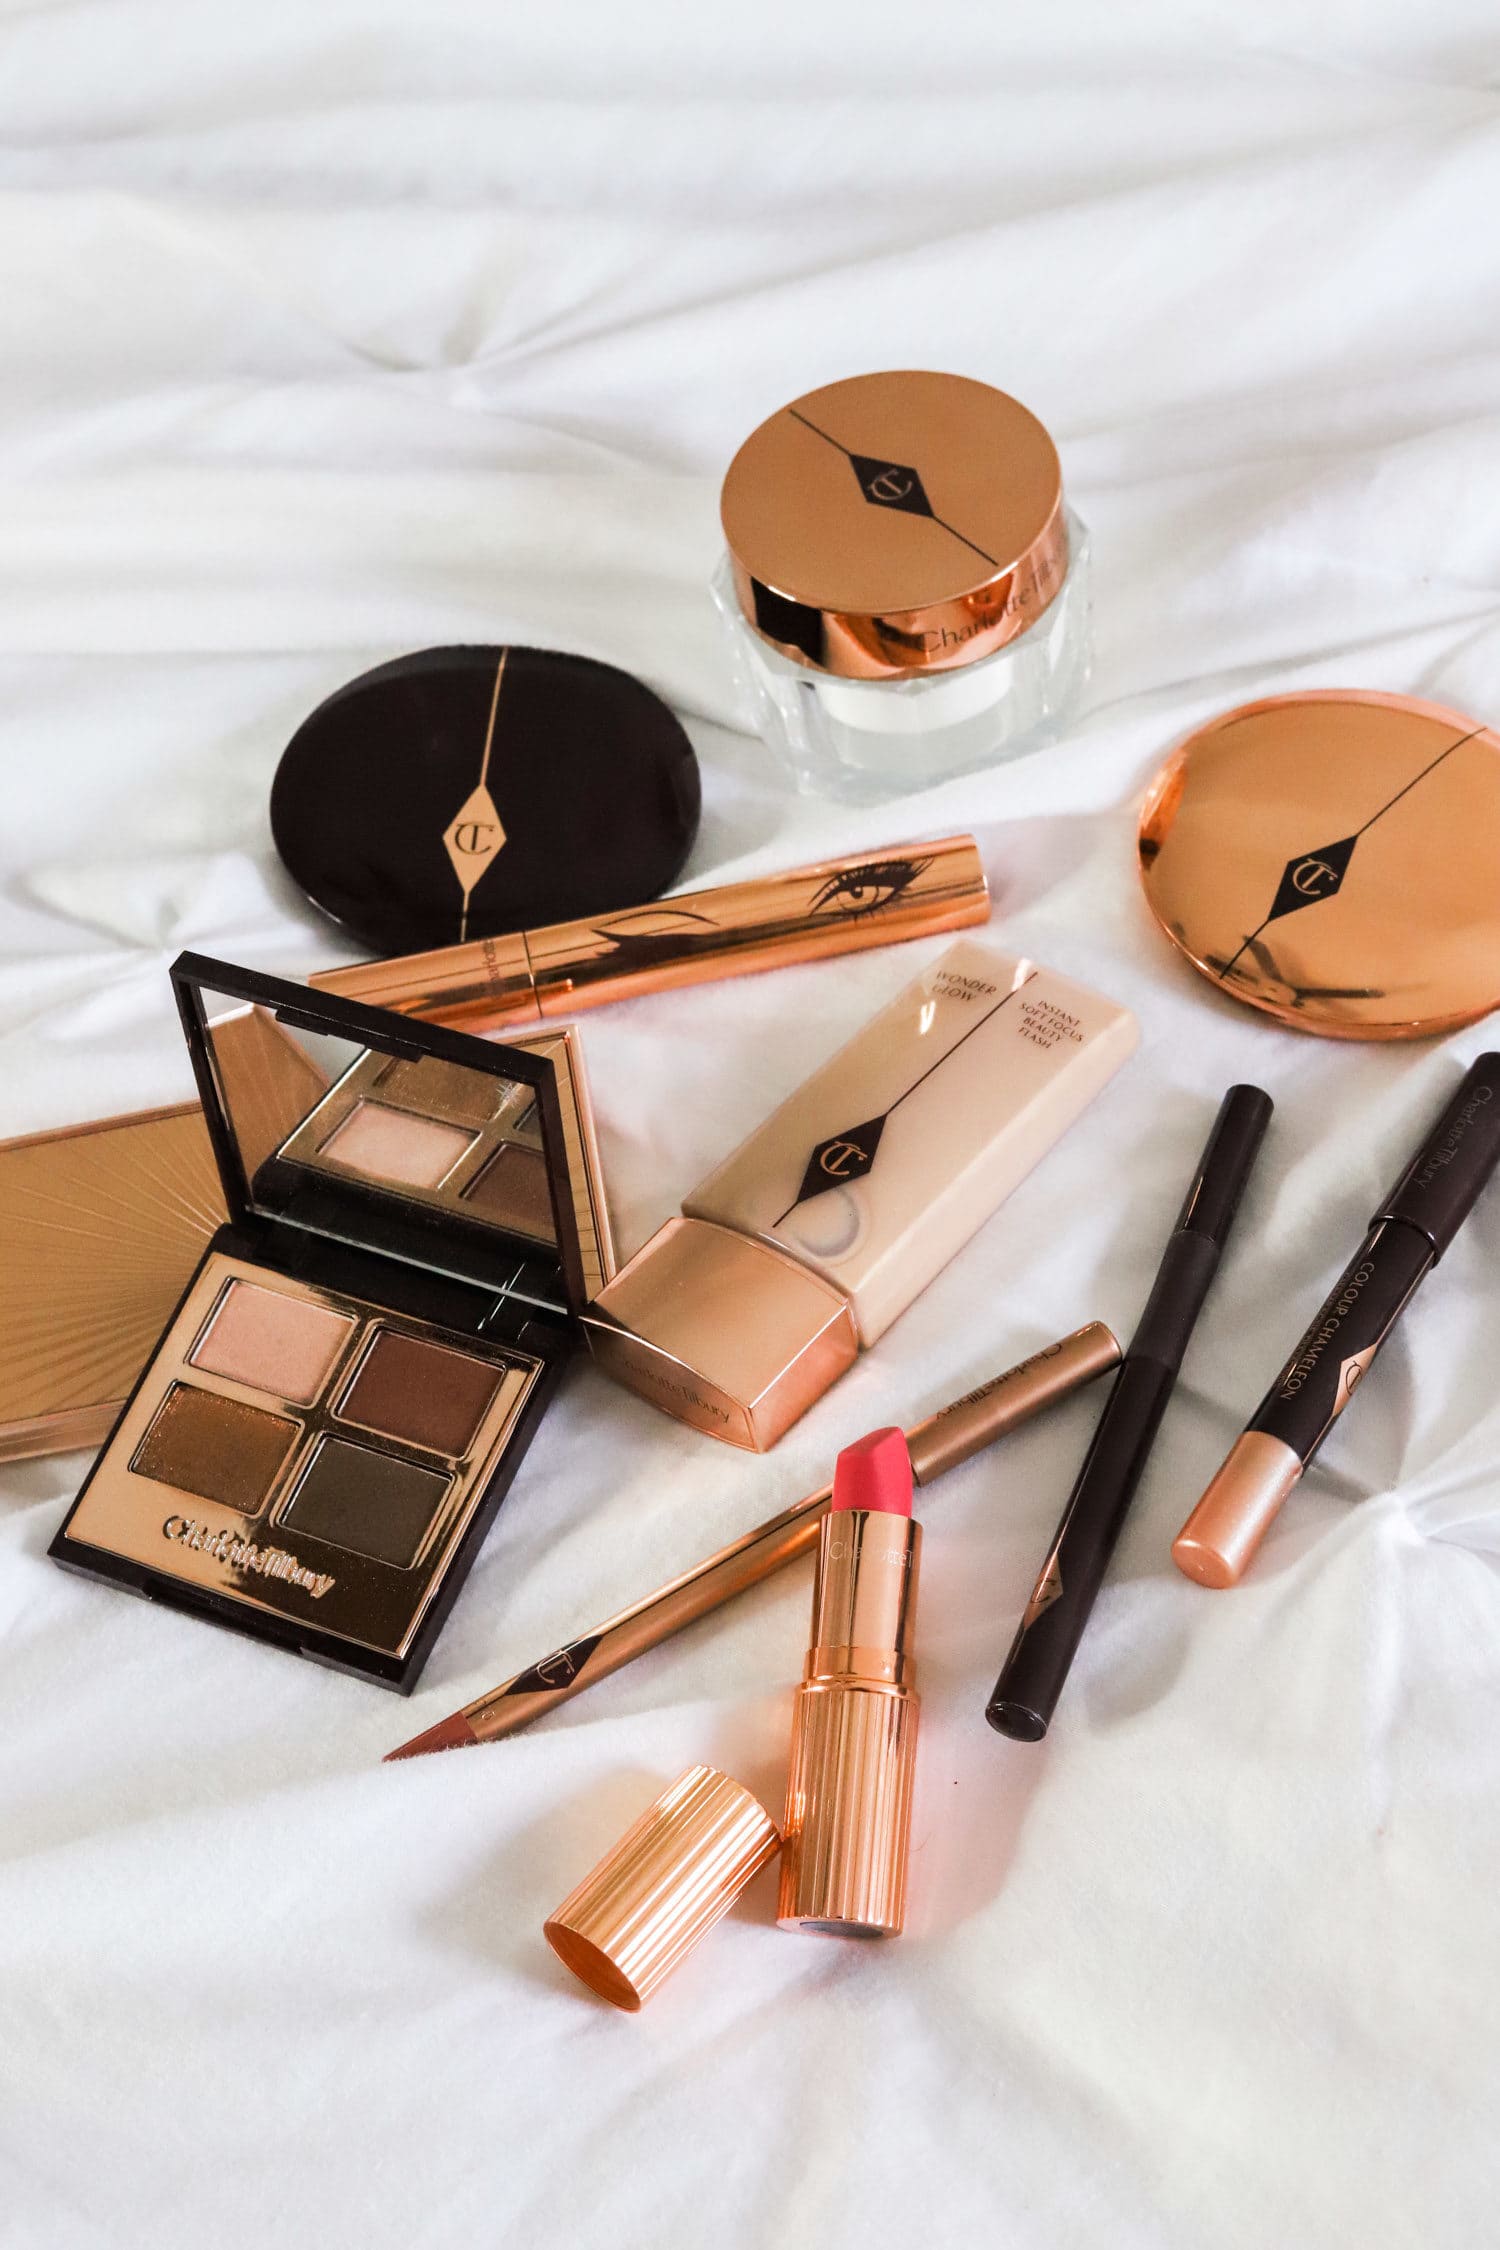 Charlotte Tilbury Review: Is Worth The Hype?